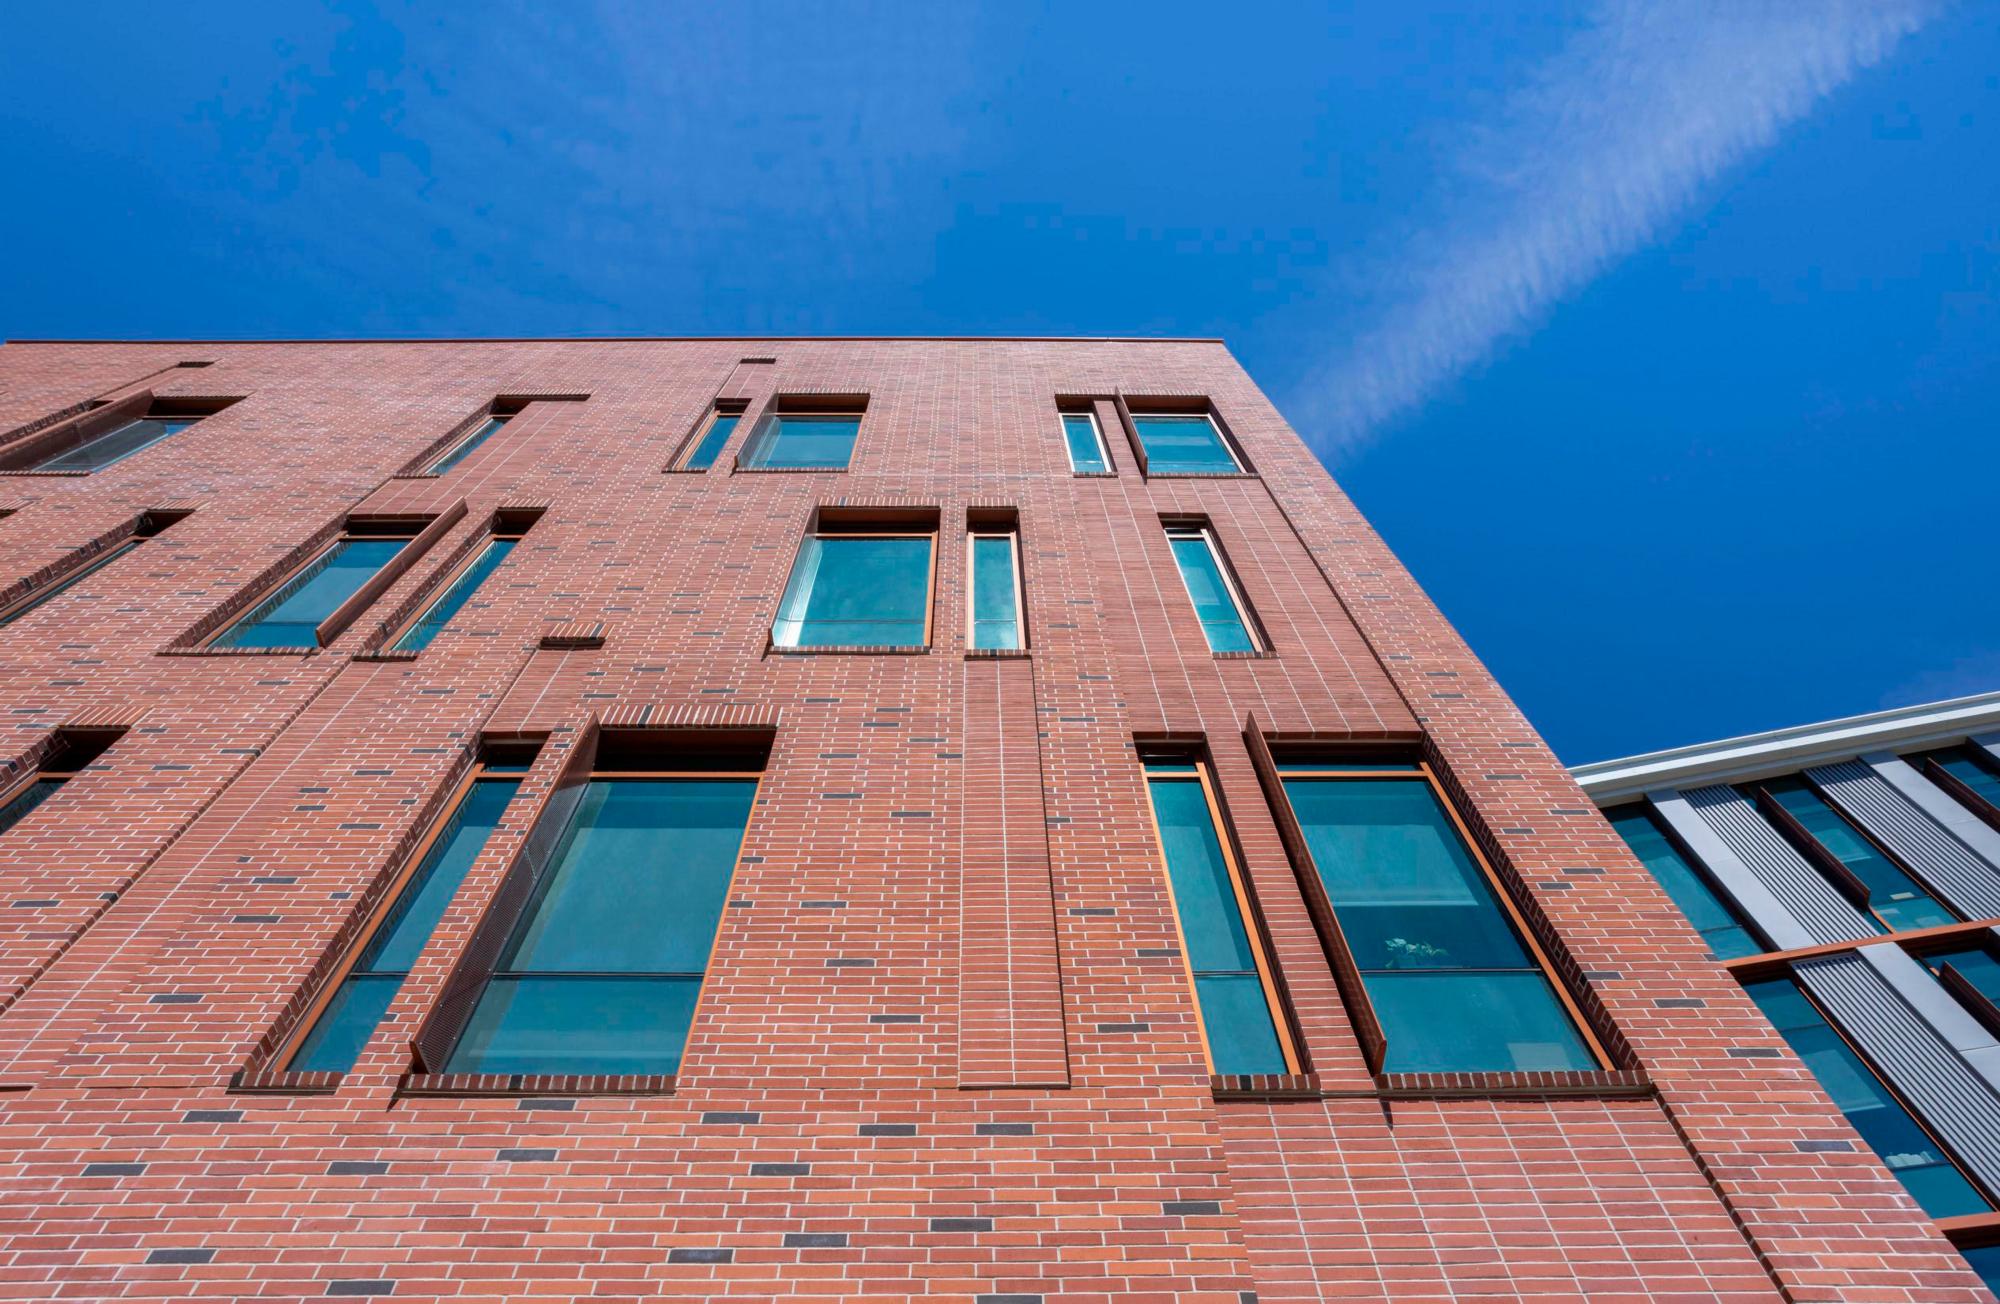 The red bricks of the California State University, Chico Science Building beneath a sky of blue